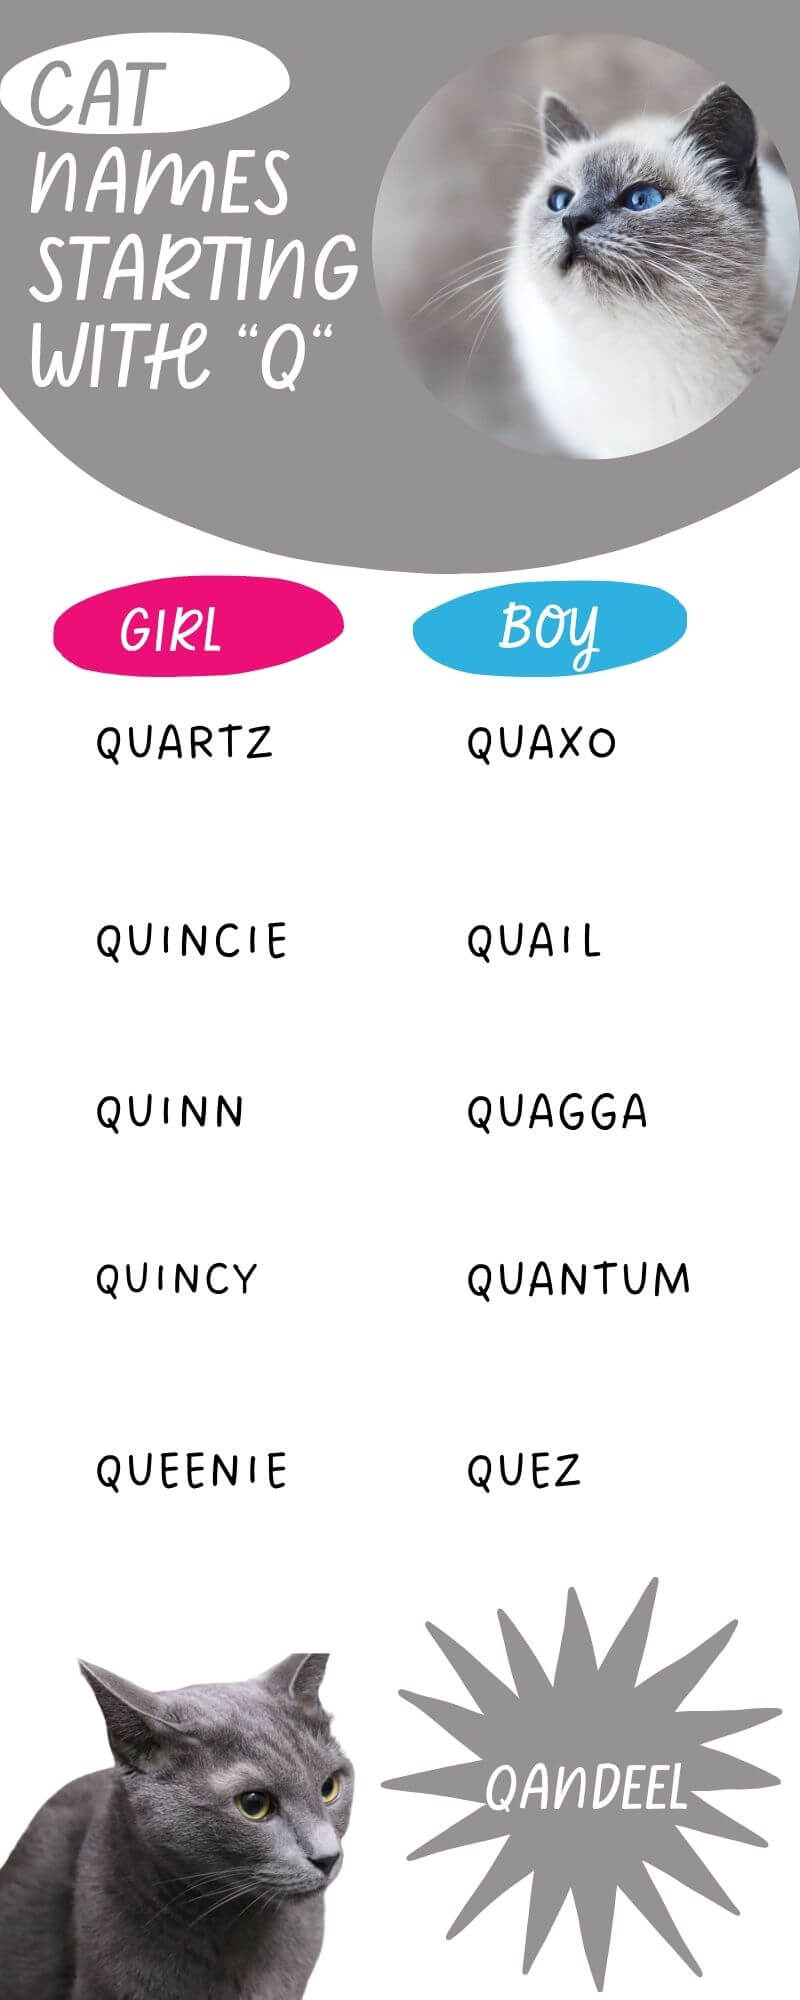 An Infographic showing the list of 11 Cat Names Starting with Q